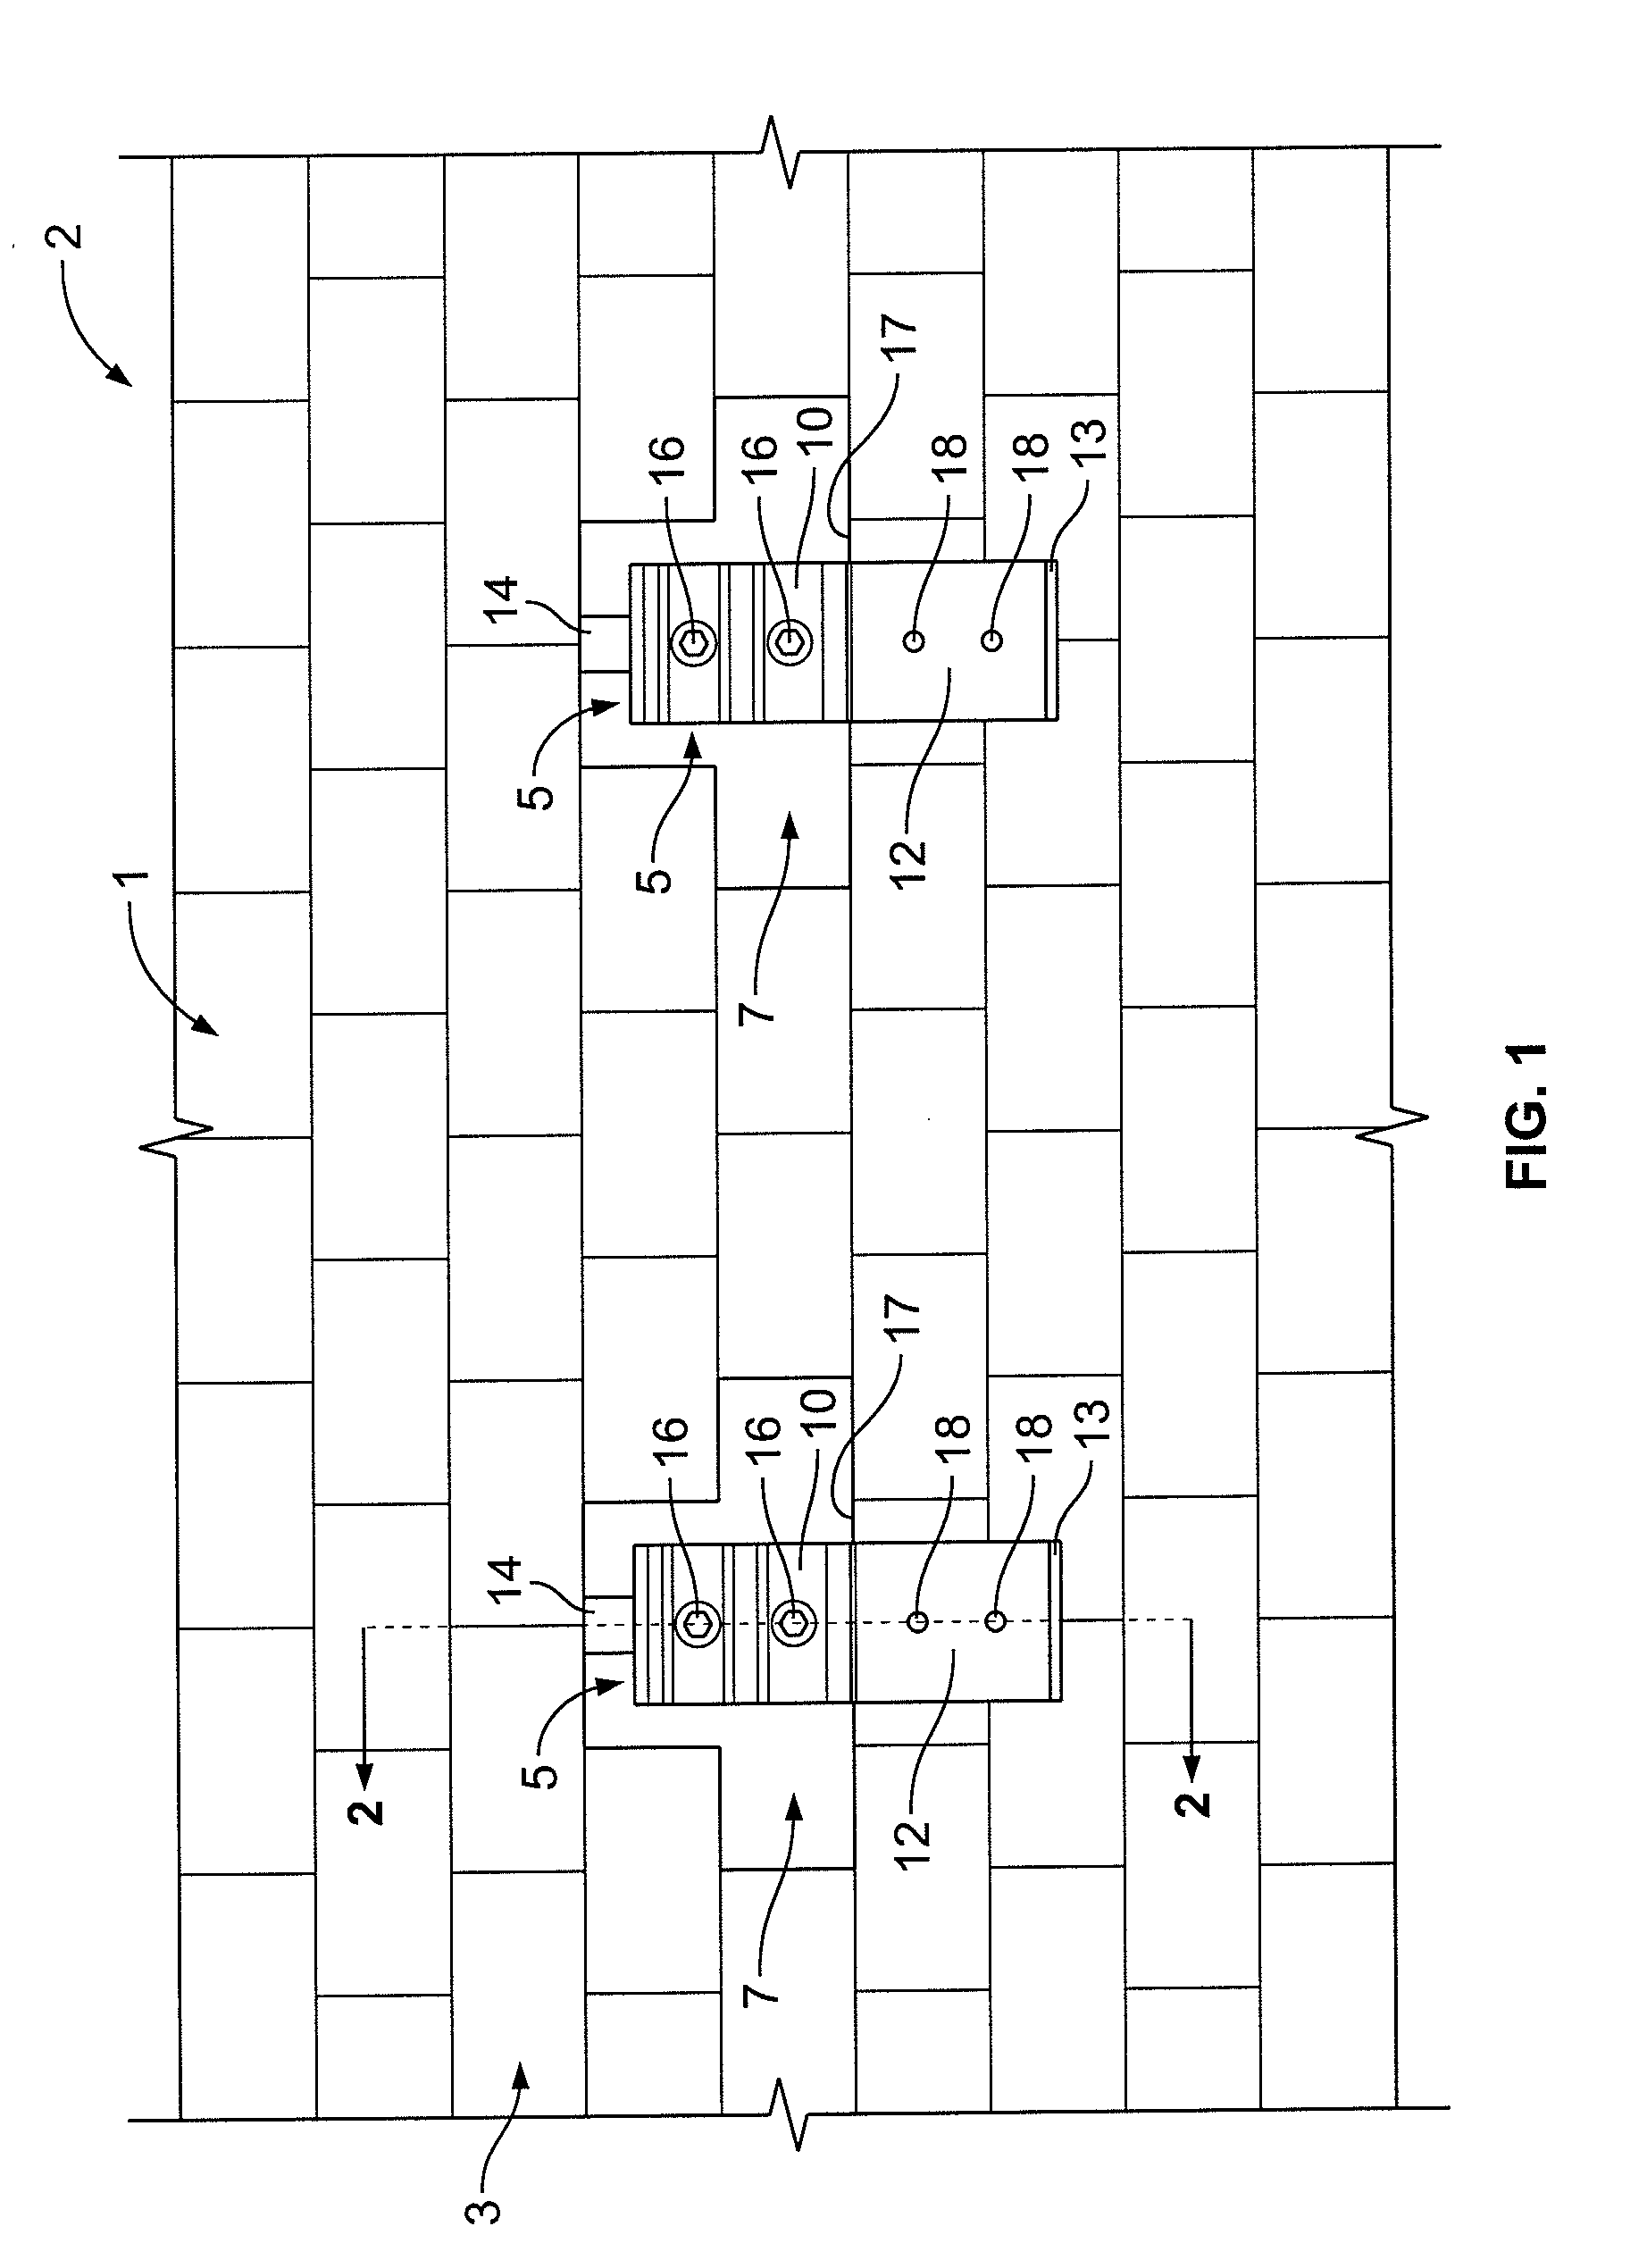 Brick bracket for installation of a ledger on the brick facing or veneer of a structure and associated methods for the installation of the brick bracket on the brick facing